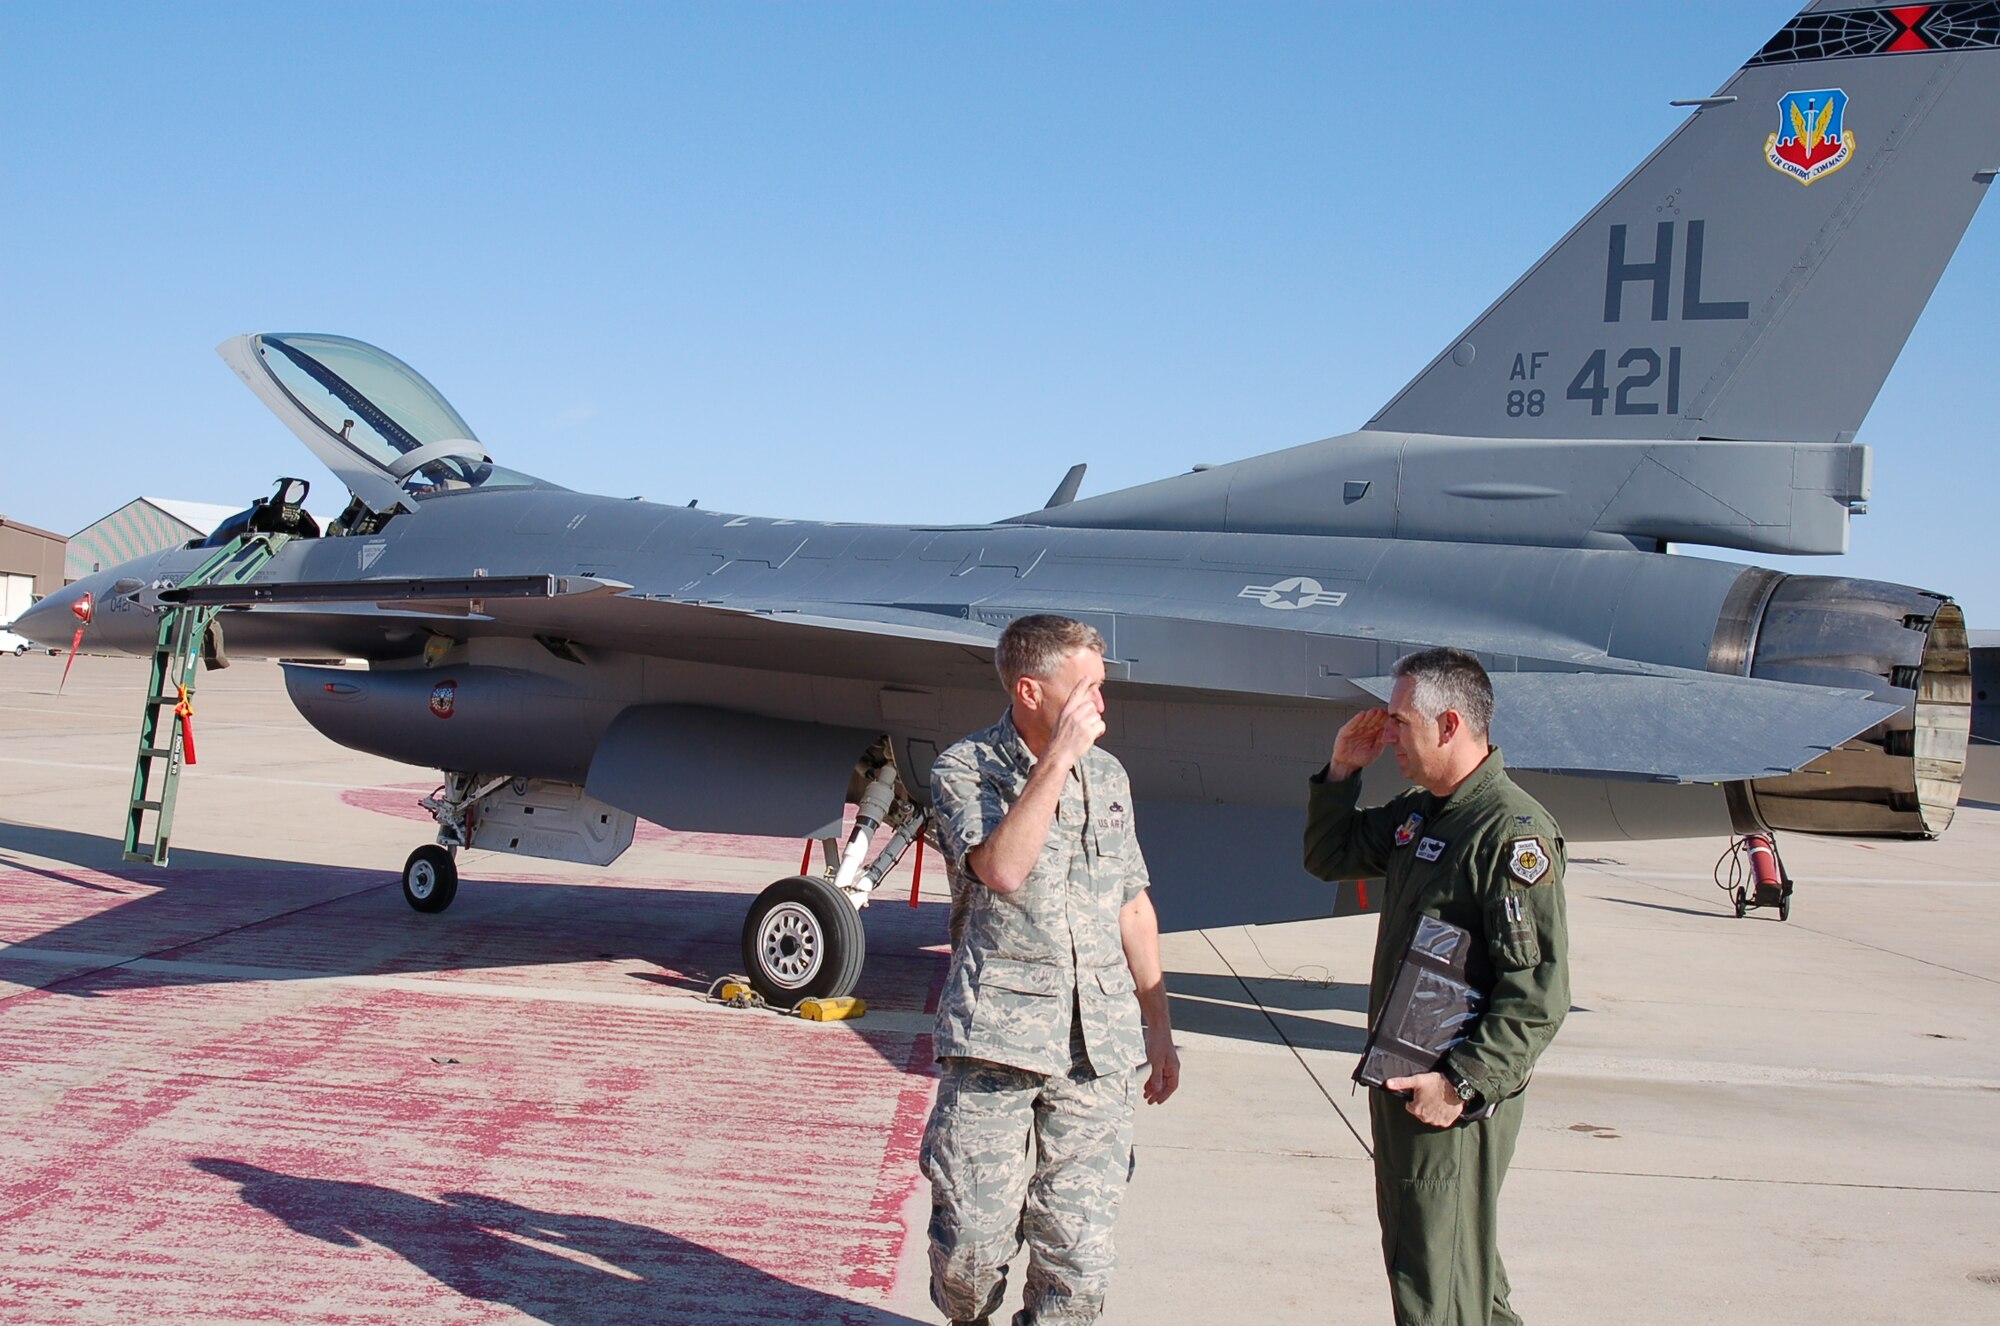 The final 388th Fighter Wing Block 40 F-16 to undergo Common Configuration Implementation Program upgrades is handed over to Col. Scott Dennis (right), 388th FW commander, in a ceremony April 21.  Beginning in November 2005, depot workers from the 309th Maintenance Wing, led by Brig. Gen. Art Cameron (left), invested over 5,500 maintenance hours into each of 388th FW's 72 aircraft.  CCIP brings upgraded avionics and communications systems to pilots in combat.  Hill's 4th Fighter Squadron was the first to fly CCIP F-16s in combat in August 2007.  (U.S. Air Force photo by Bill Orndorff) 